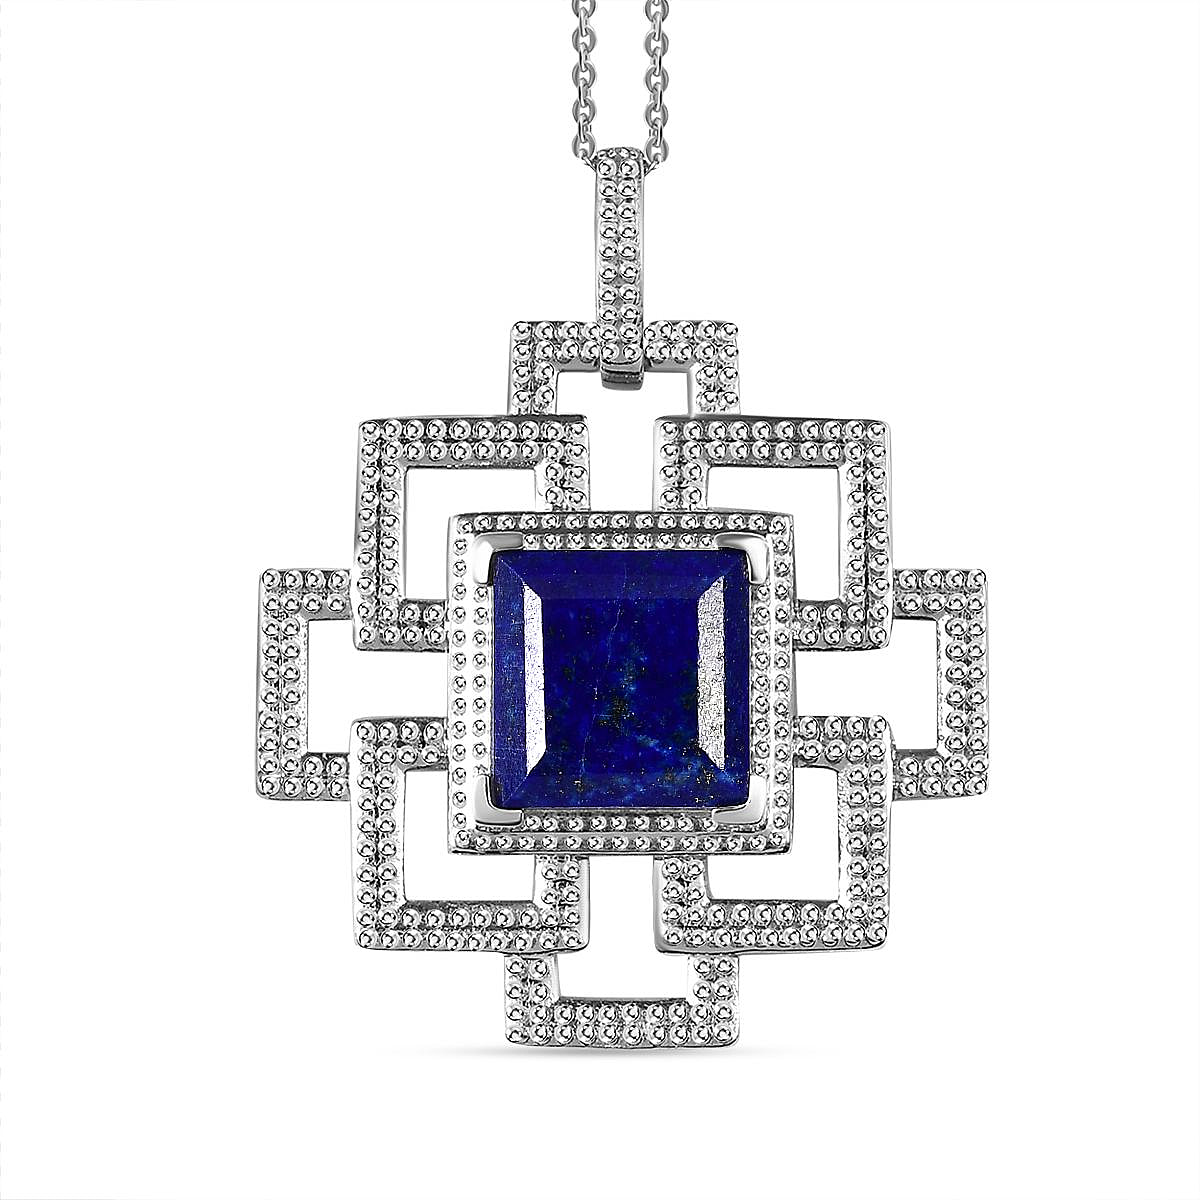 Lapis Lazuli Pendant with Chain (Size 20) in Platinum Overlay Sterling Silver 9.00 Ct, Silver Wt. 6.90 Gms